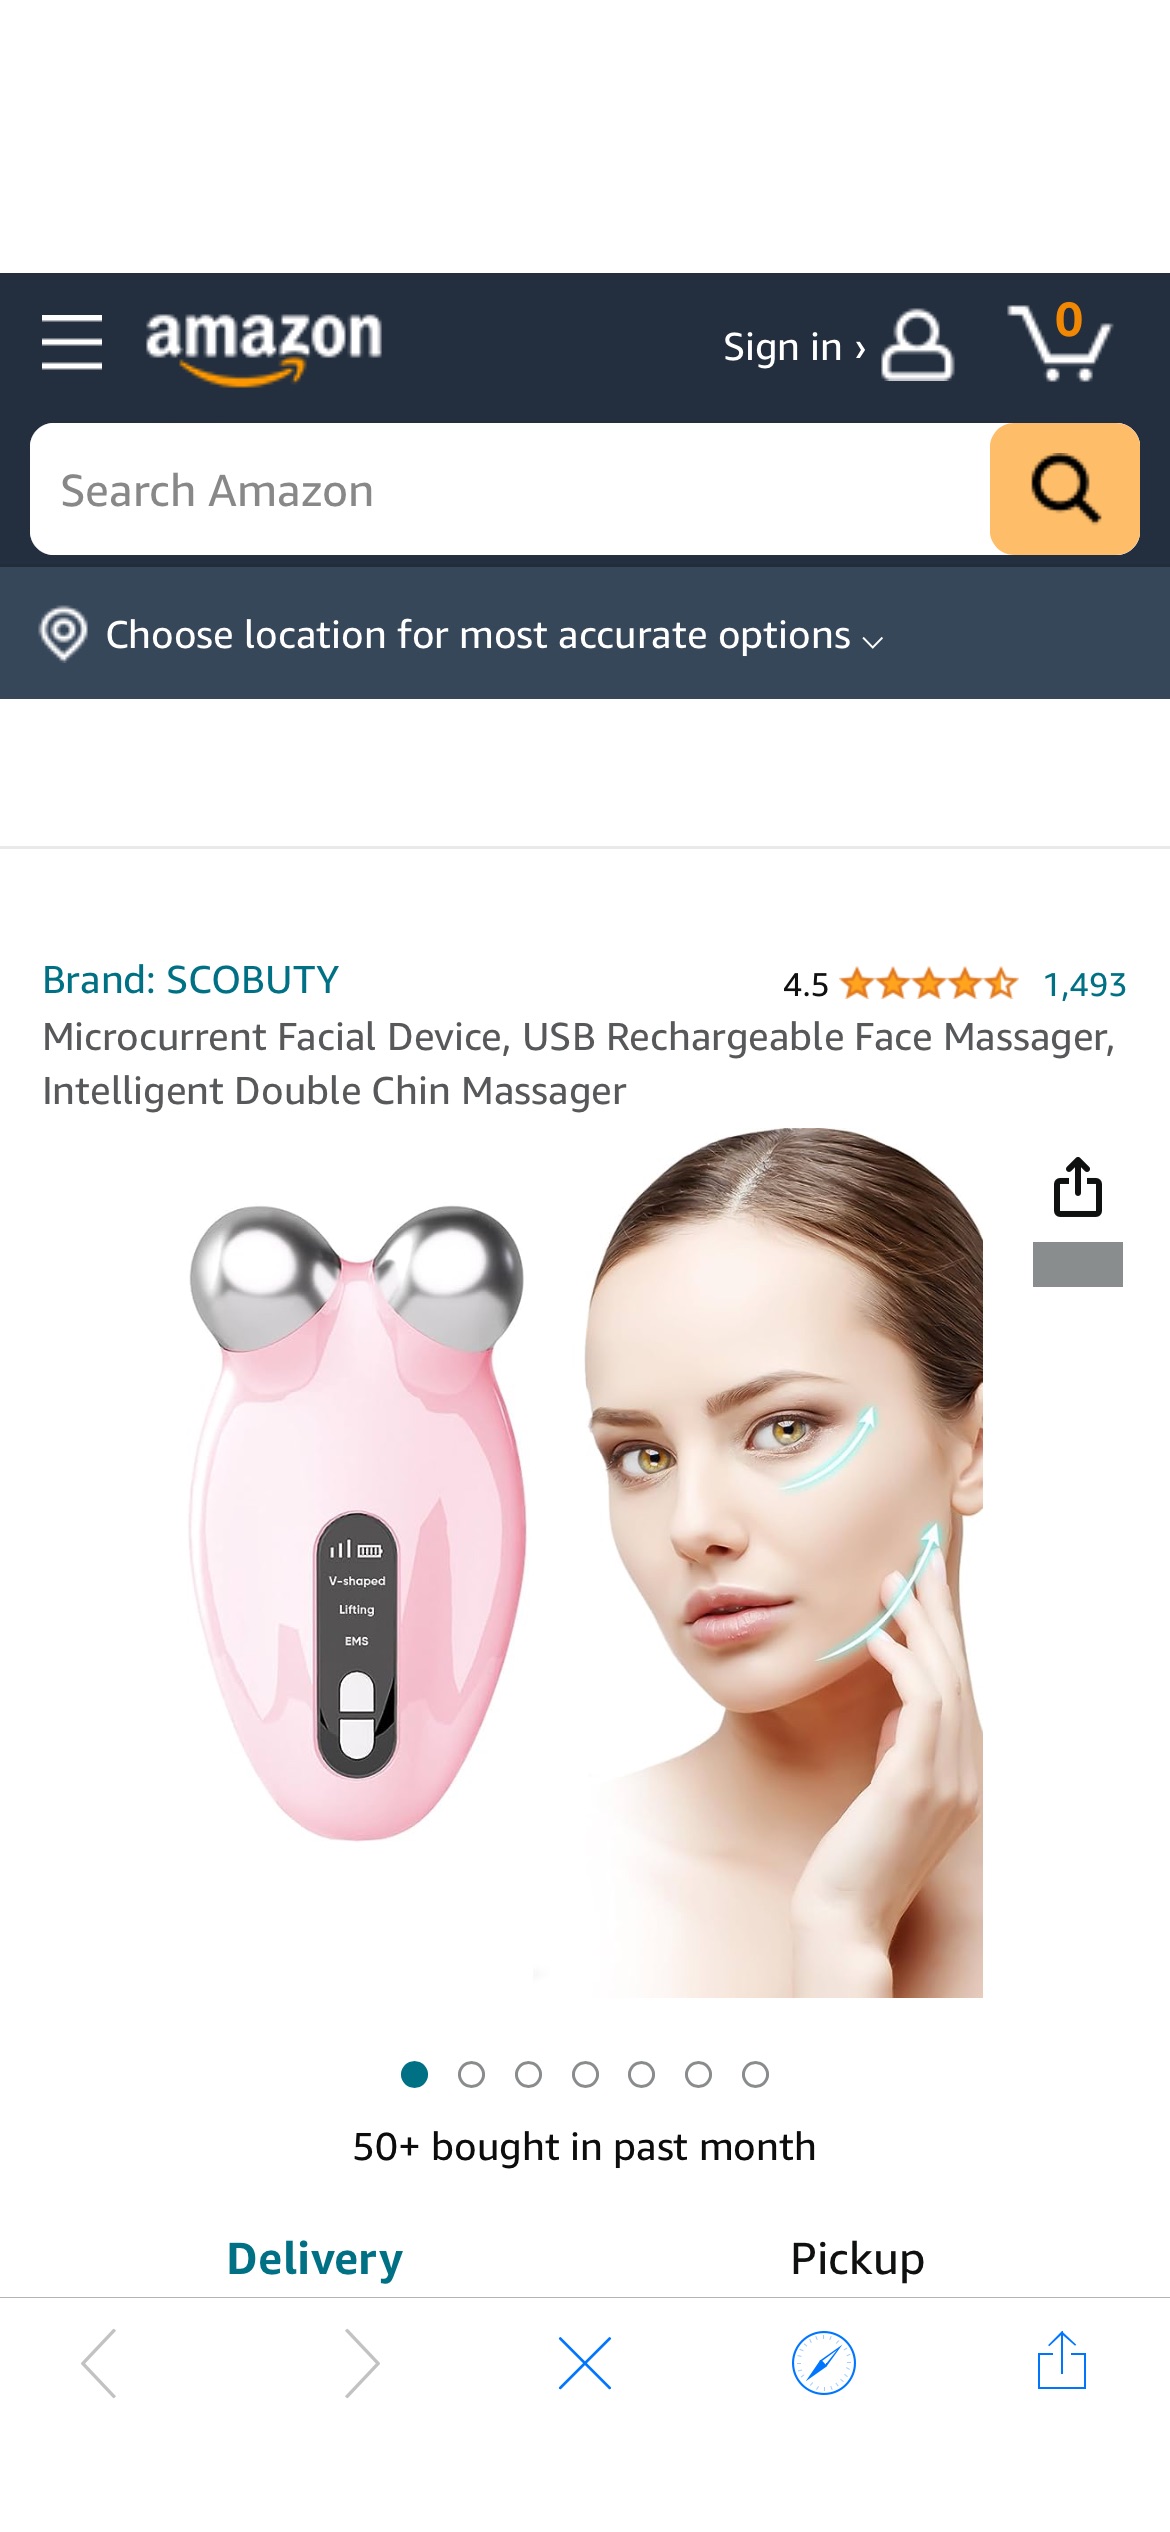 Amazon.com: Microcurrent Facial Device, USB Rechargeable Face Massager, Intelligent Double Chin Massager : Beauty & Personal Care